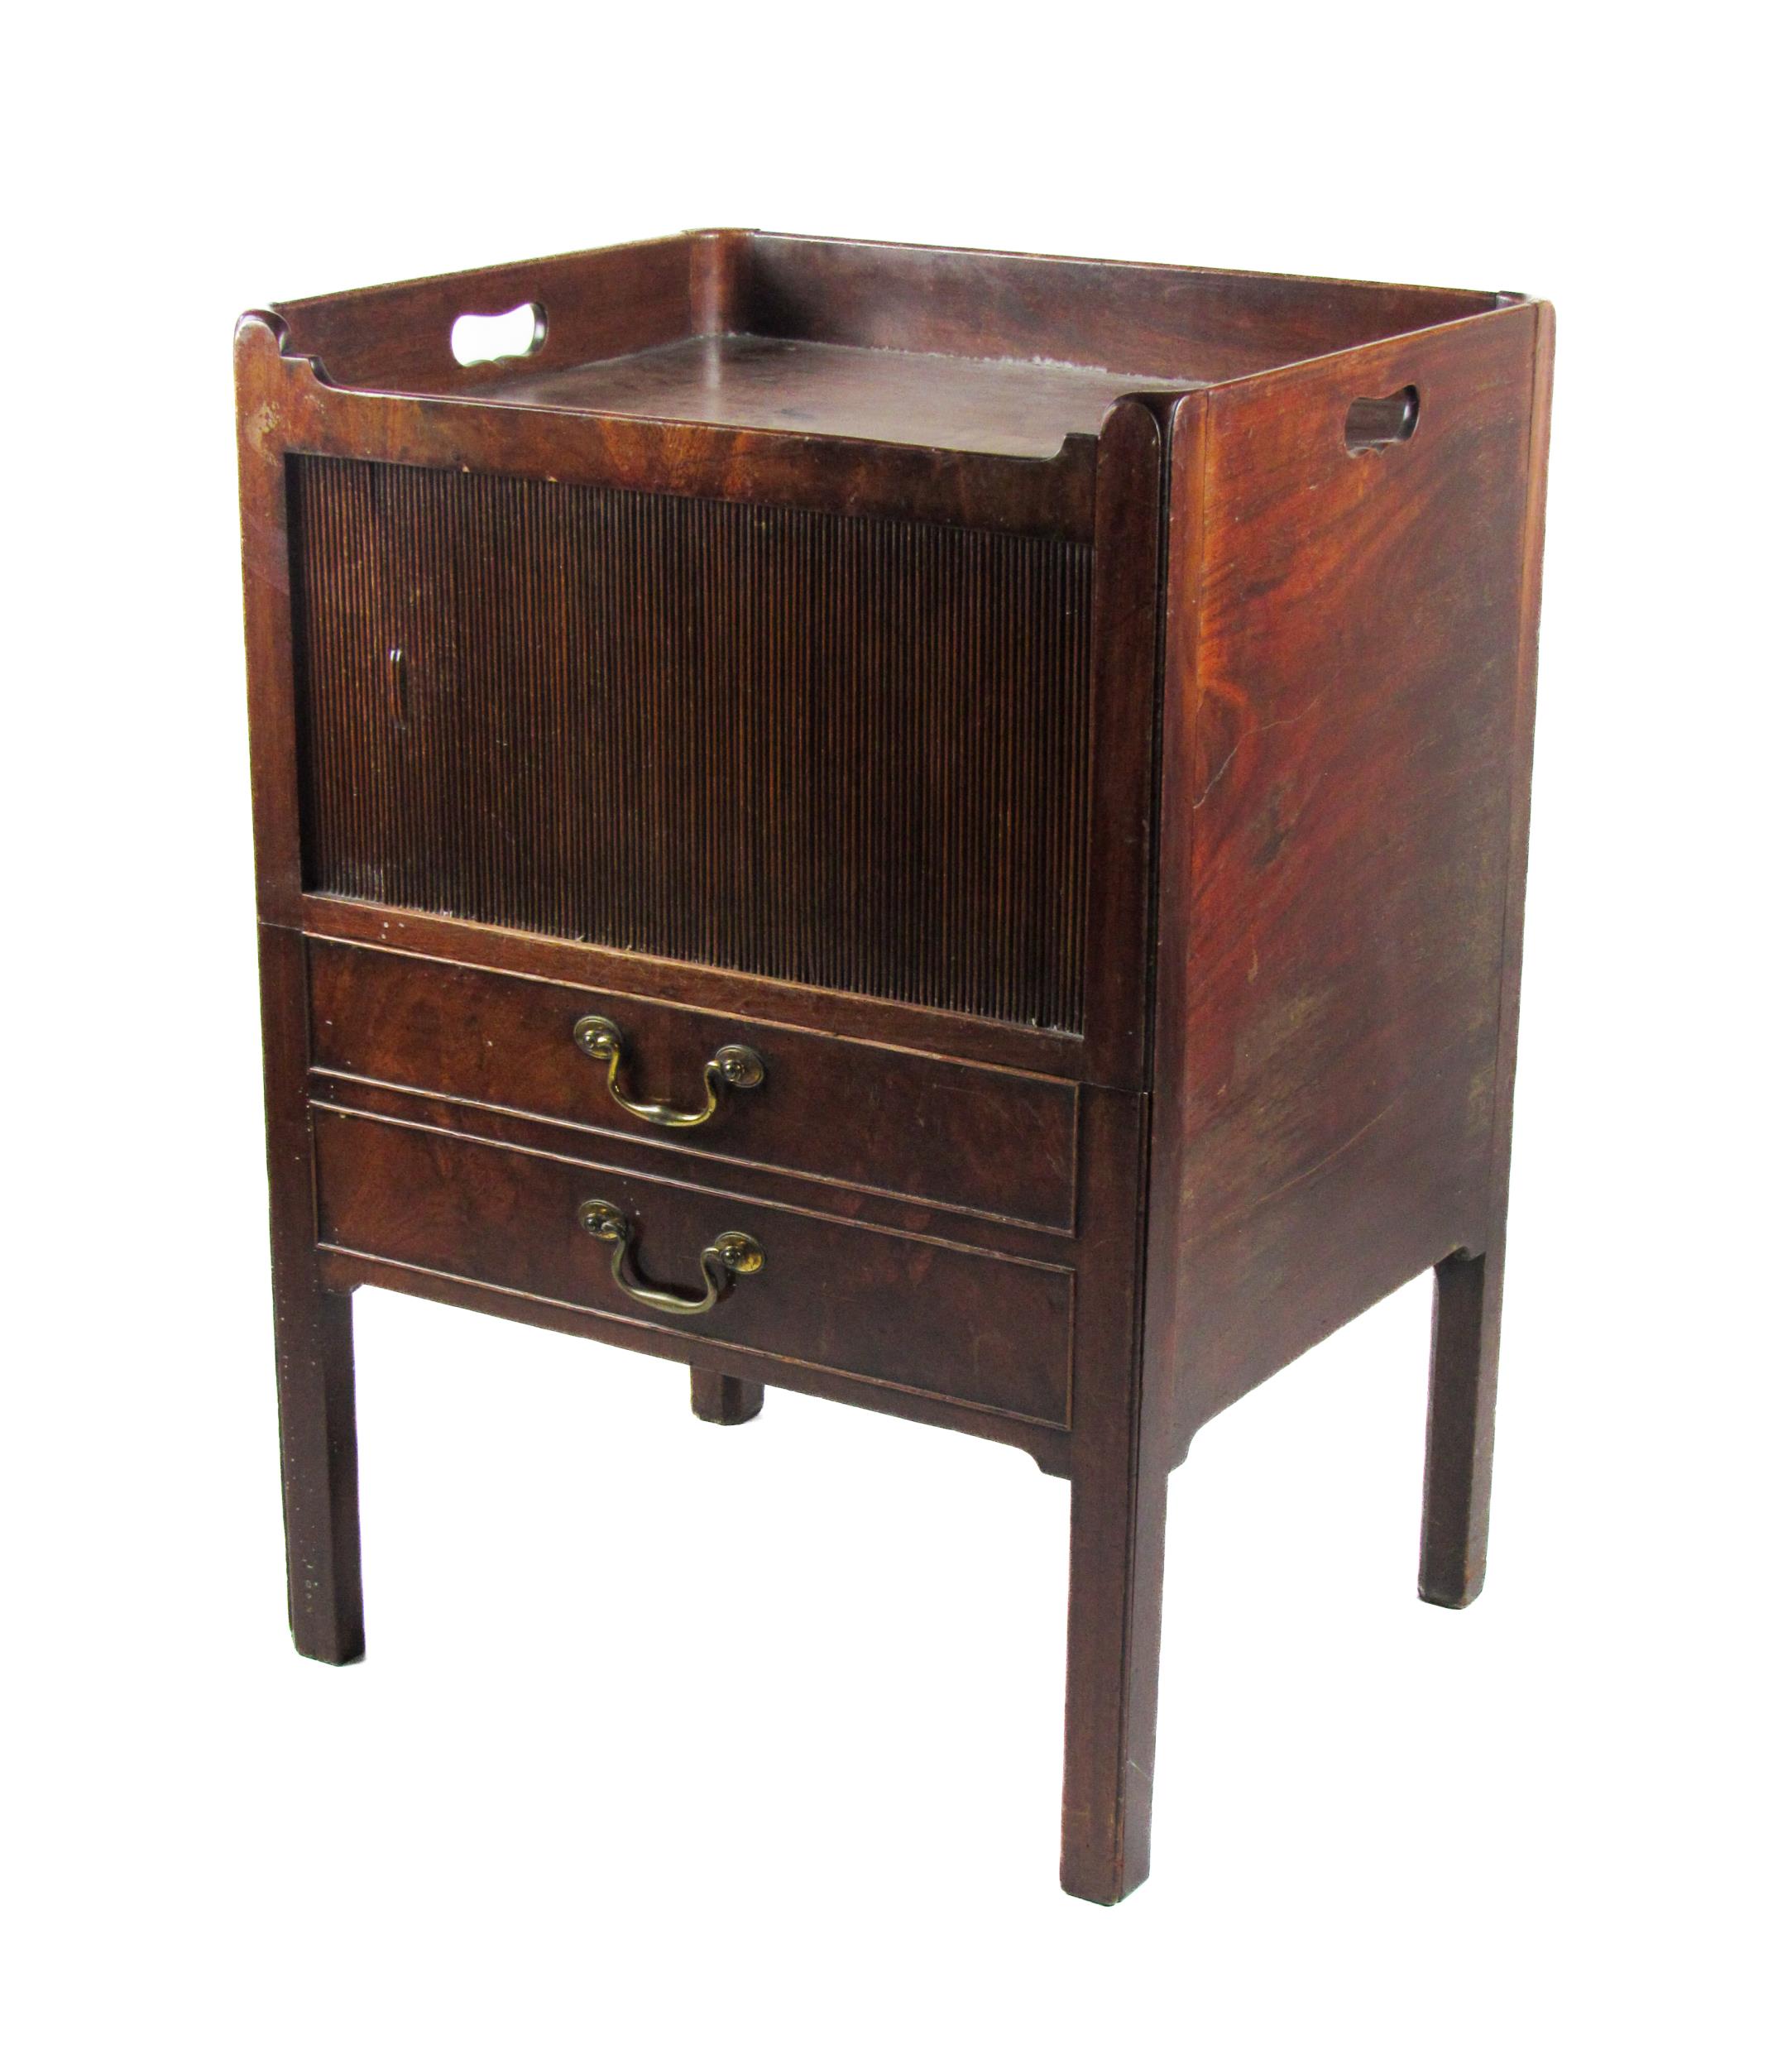 A good Georgian period mahogany Tray Top Bedside Commode, with tambour front opening over two mock